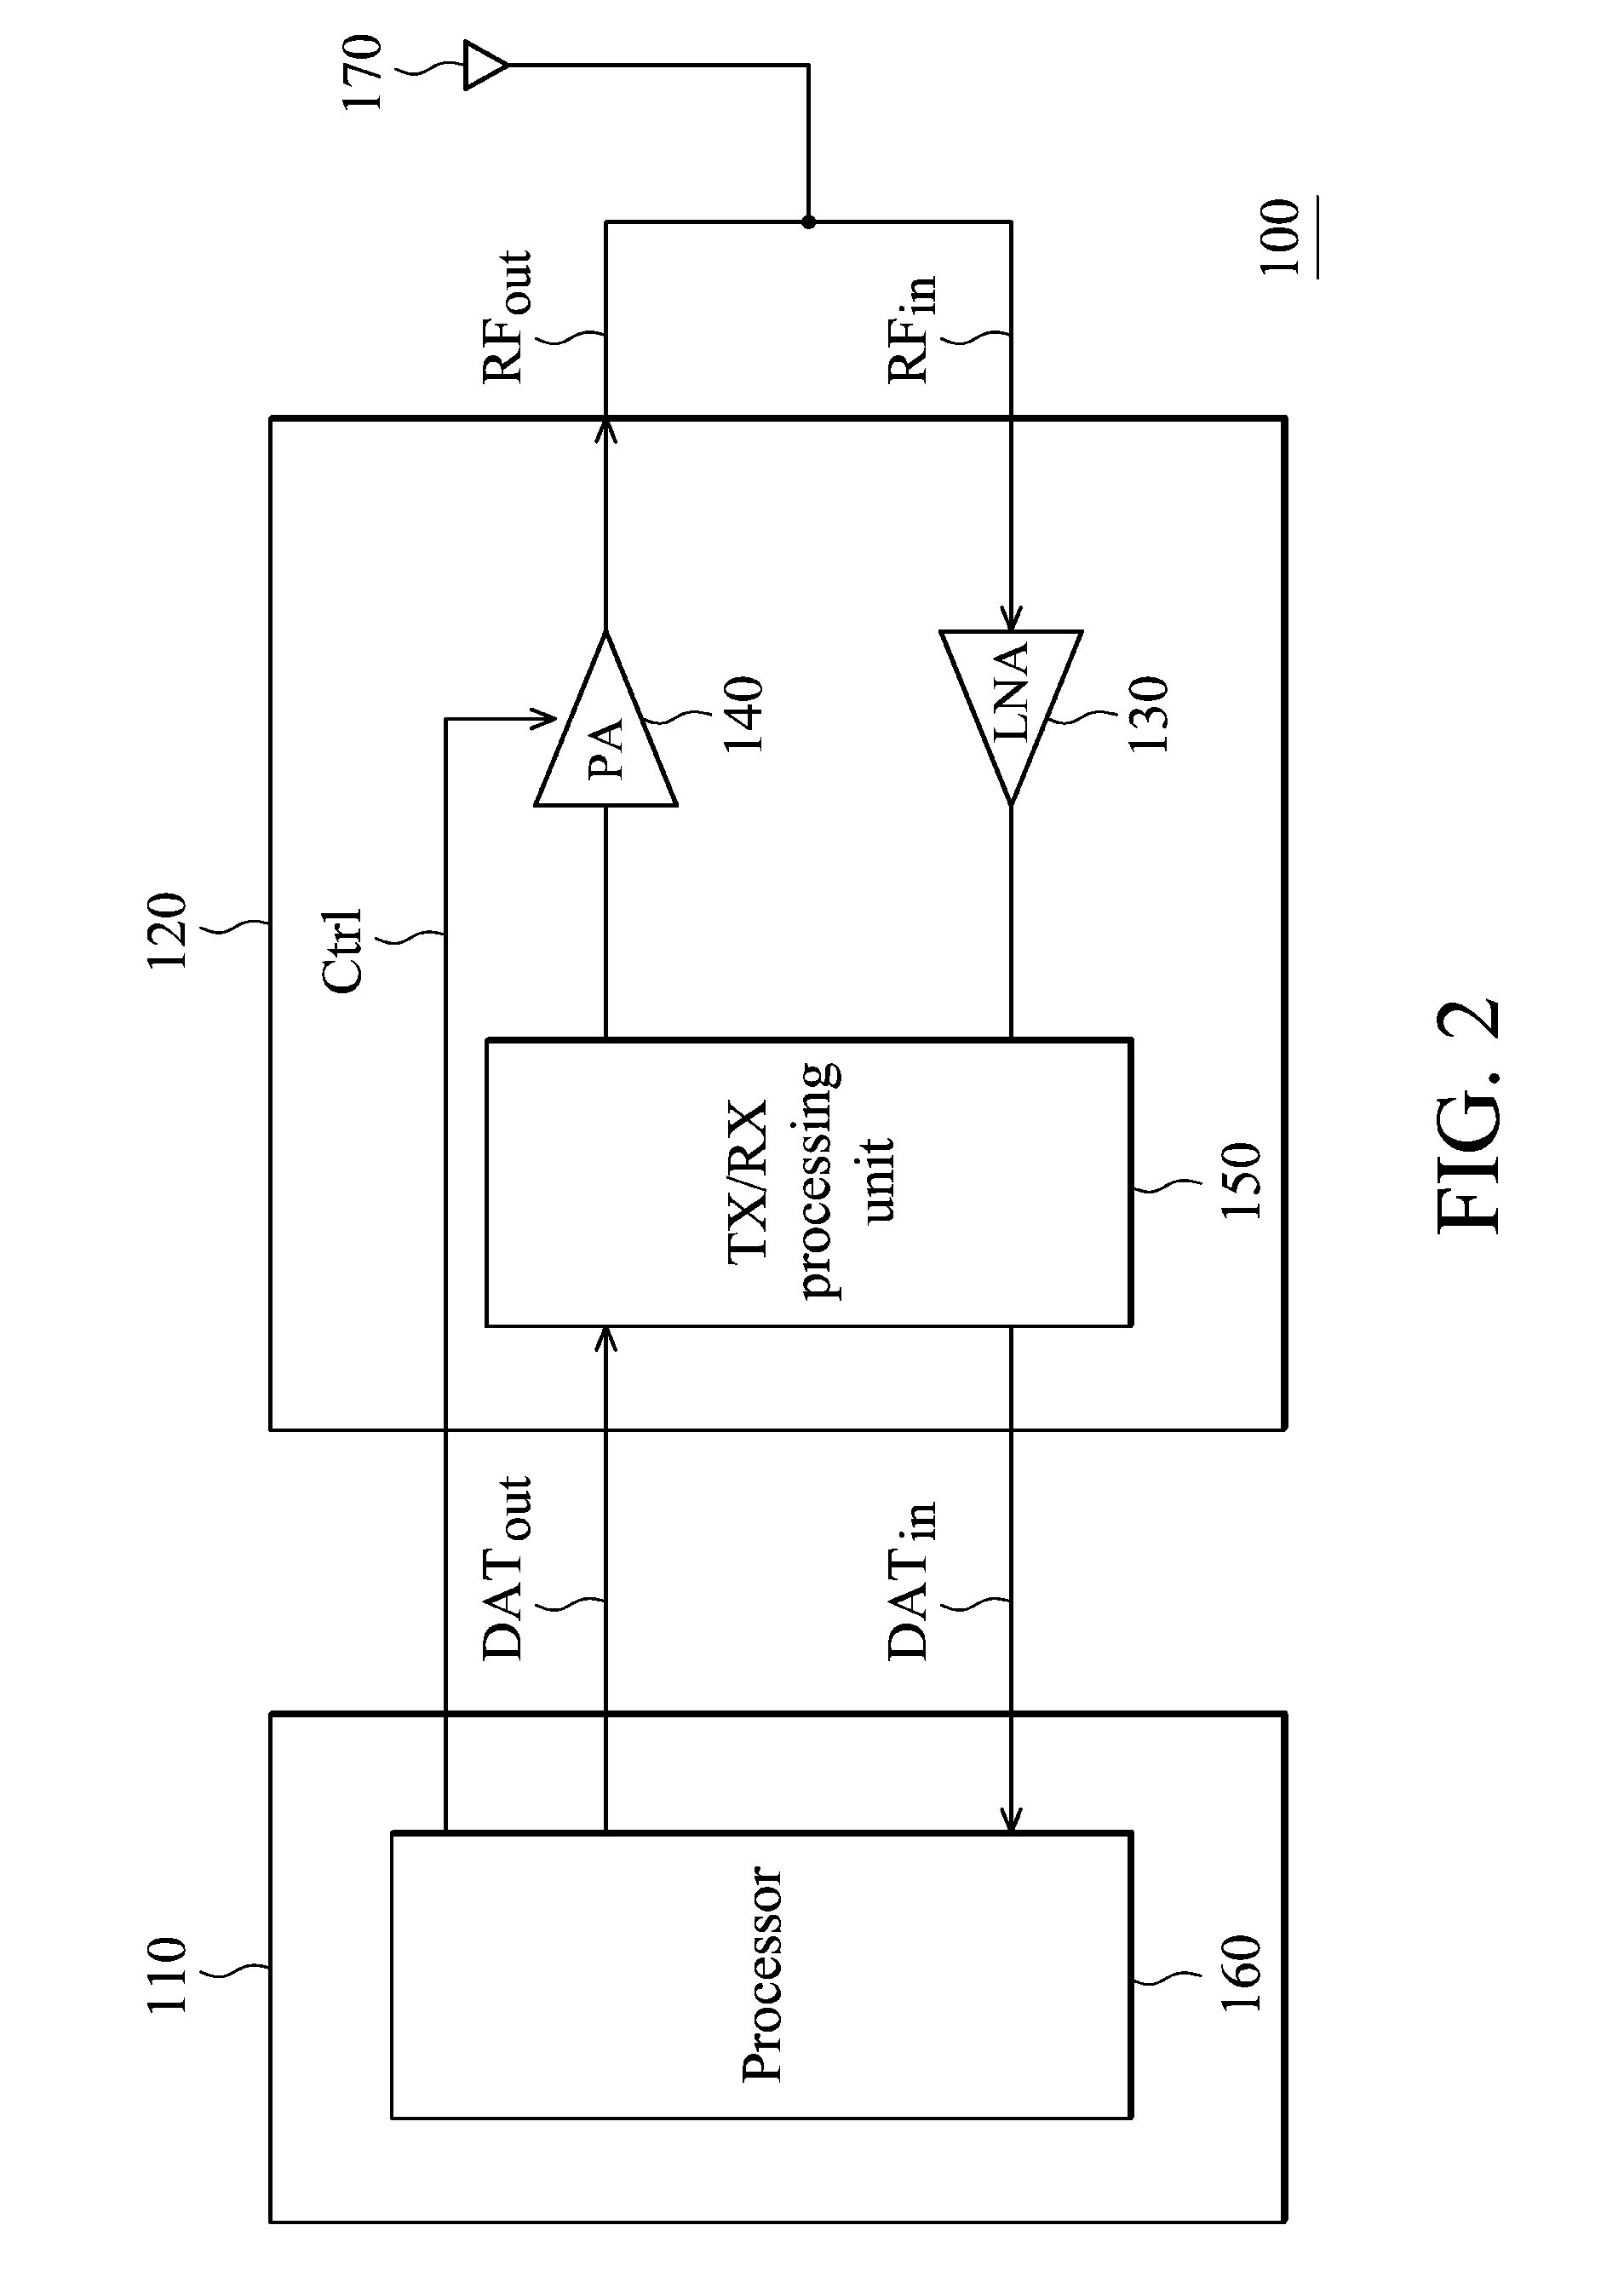 Method for controlling transmission power of wireless device